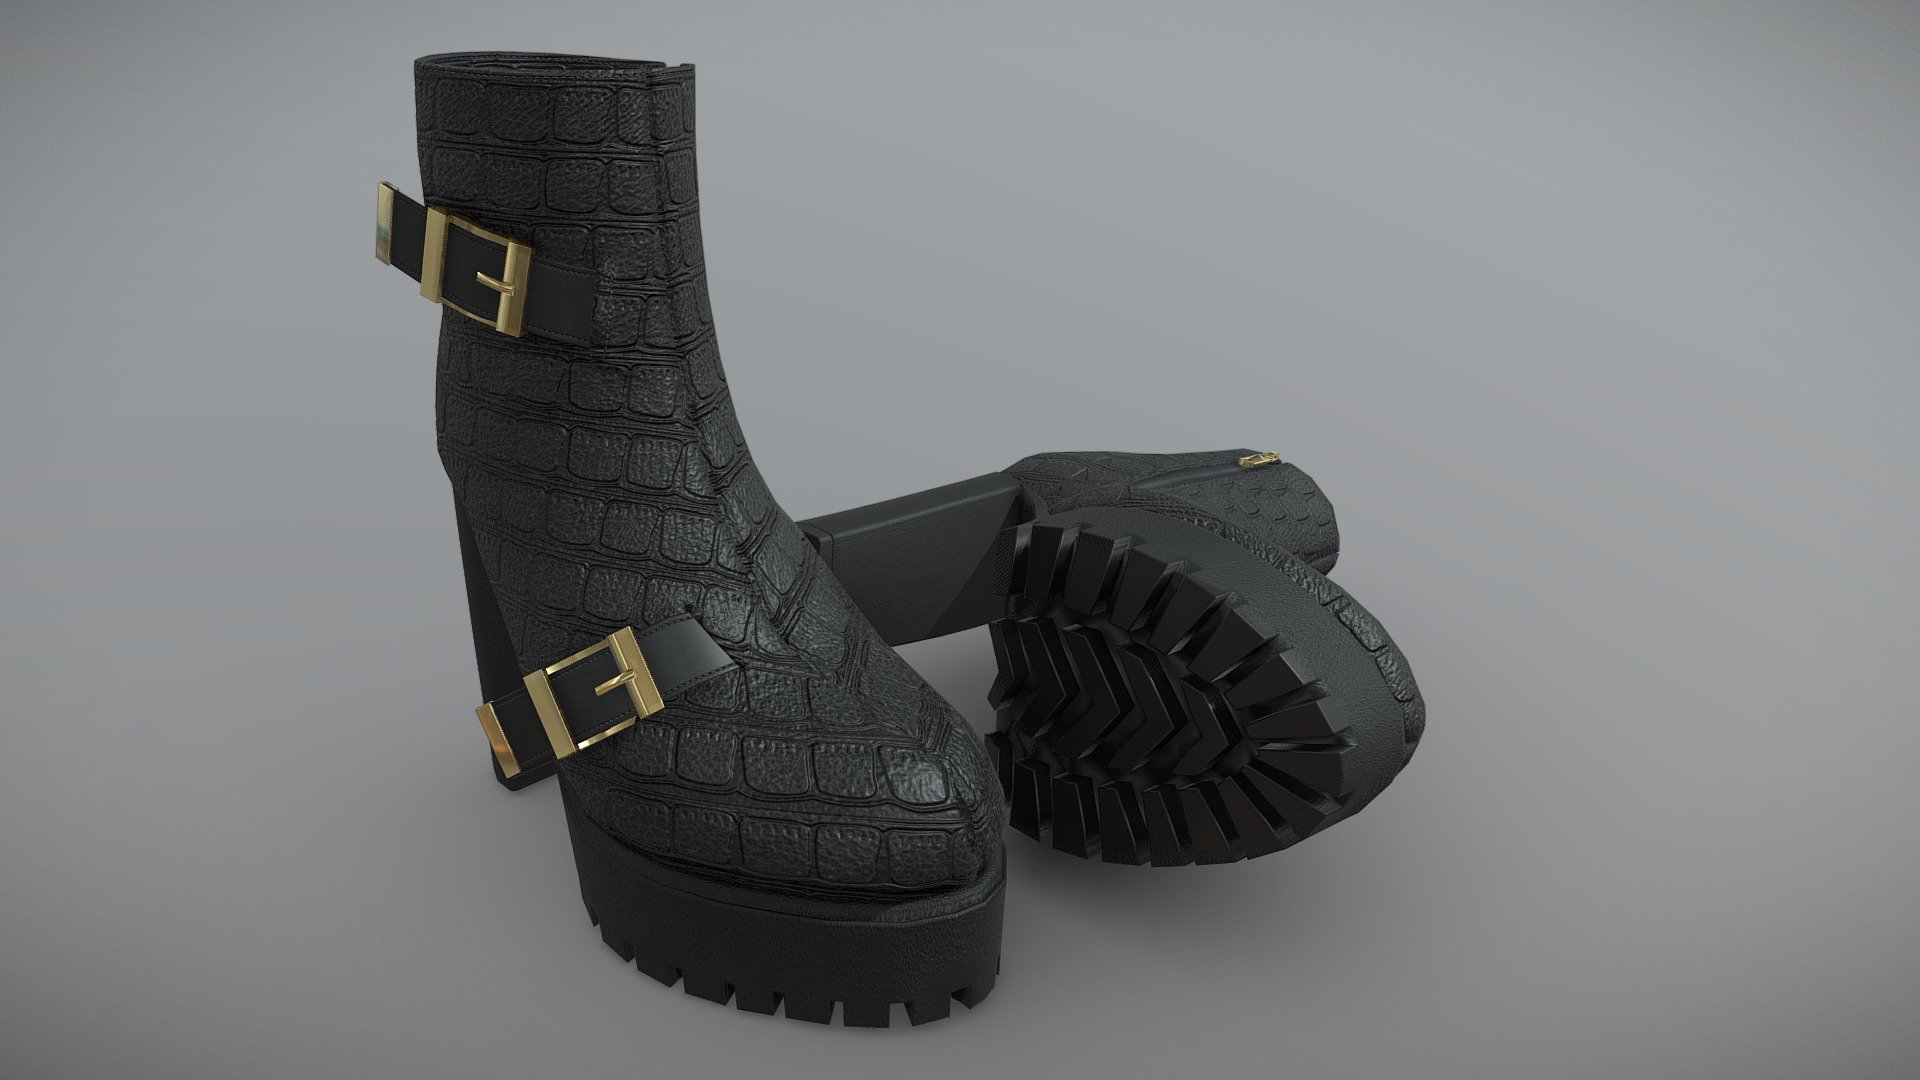 High quality photorealistic 3D model of Casual Leather Women's Boots With Heels. The model is highly accurate with clean mesh and Edge flow ready for subdivision. Model ready for close-up renders.
Created with 3ds Max 2018, rendered with V-Ray 4.1. Lighting, cameras, and V-Ray render settings included with the scene file.

Features:


Sizes are identical to natural
High-quality polygonal model
Low polygon count, Modifier Stack not collapsed
3ds Max is the native format
Preview rendered with V-Ray
OBJ and FBX are directly exported from 3ds Max

Included PBR maps in 4096x4096 resolution:
- BaseColor
- Normal
- Height
- Metallic
- Roughness - Casual Leather Women's Boots With Heels Low-poly - 3D model by edwardmuzhevskiy 3d model